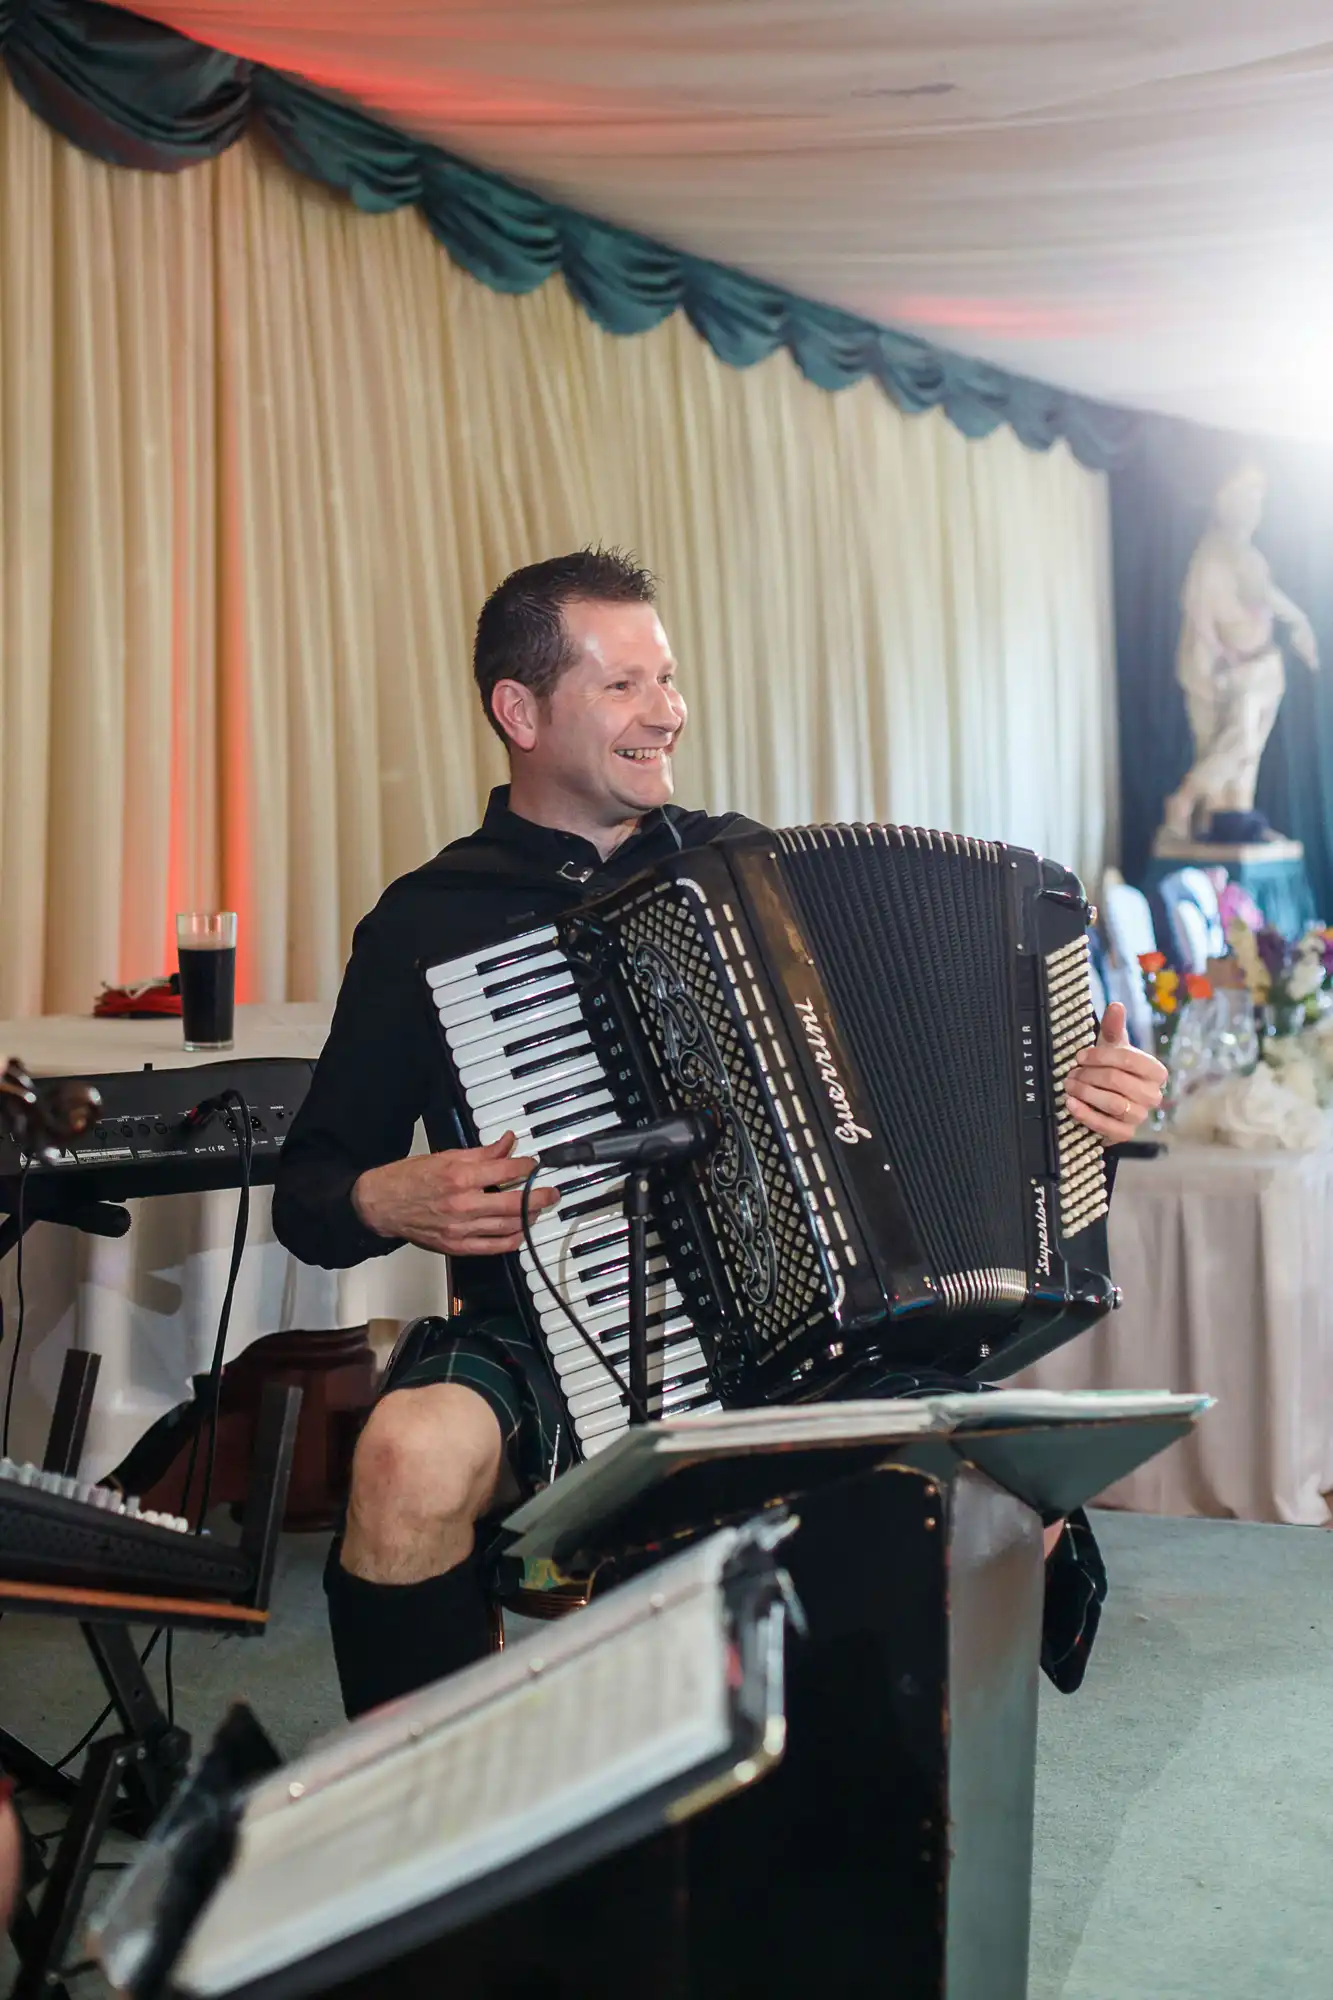 A man smiling while playing an accordion at an indoor event, with a keyboard and decorated tables in the background.